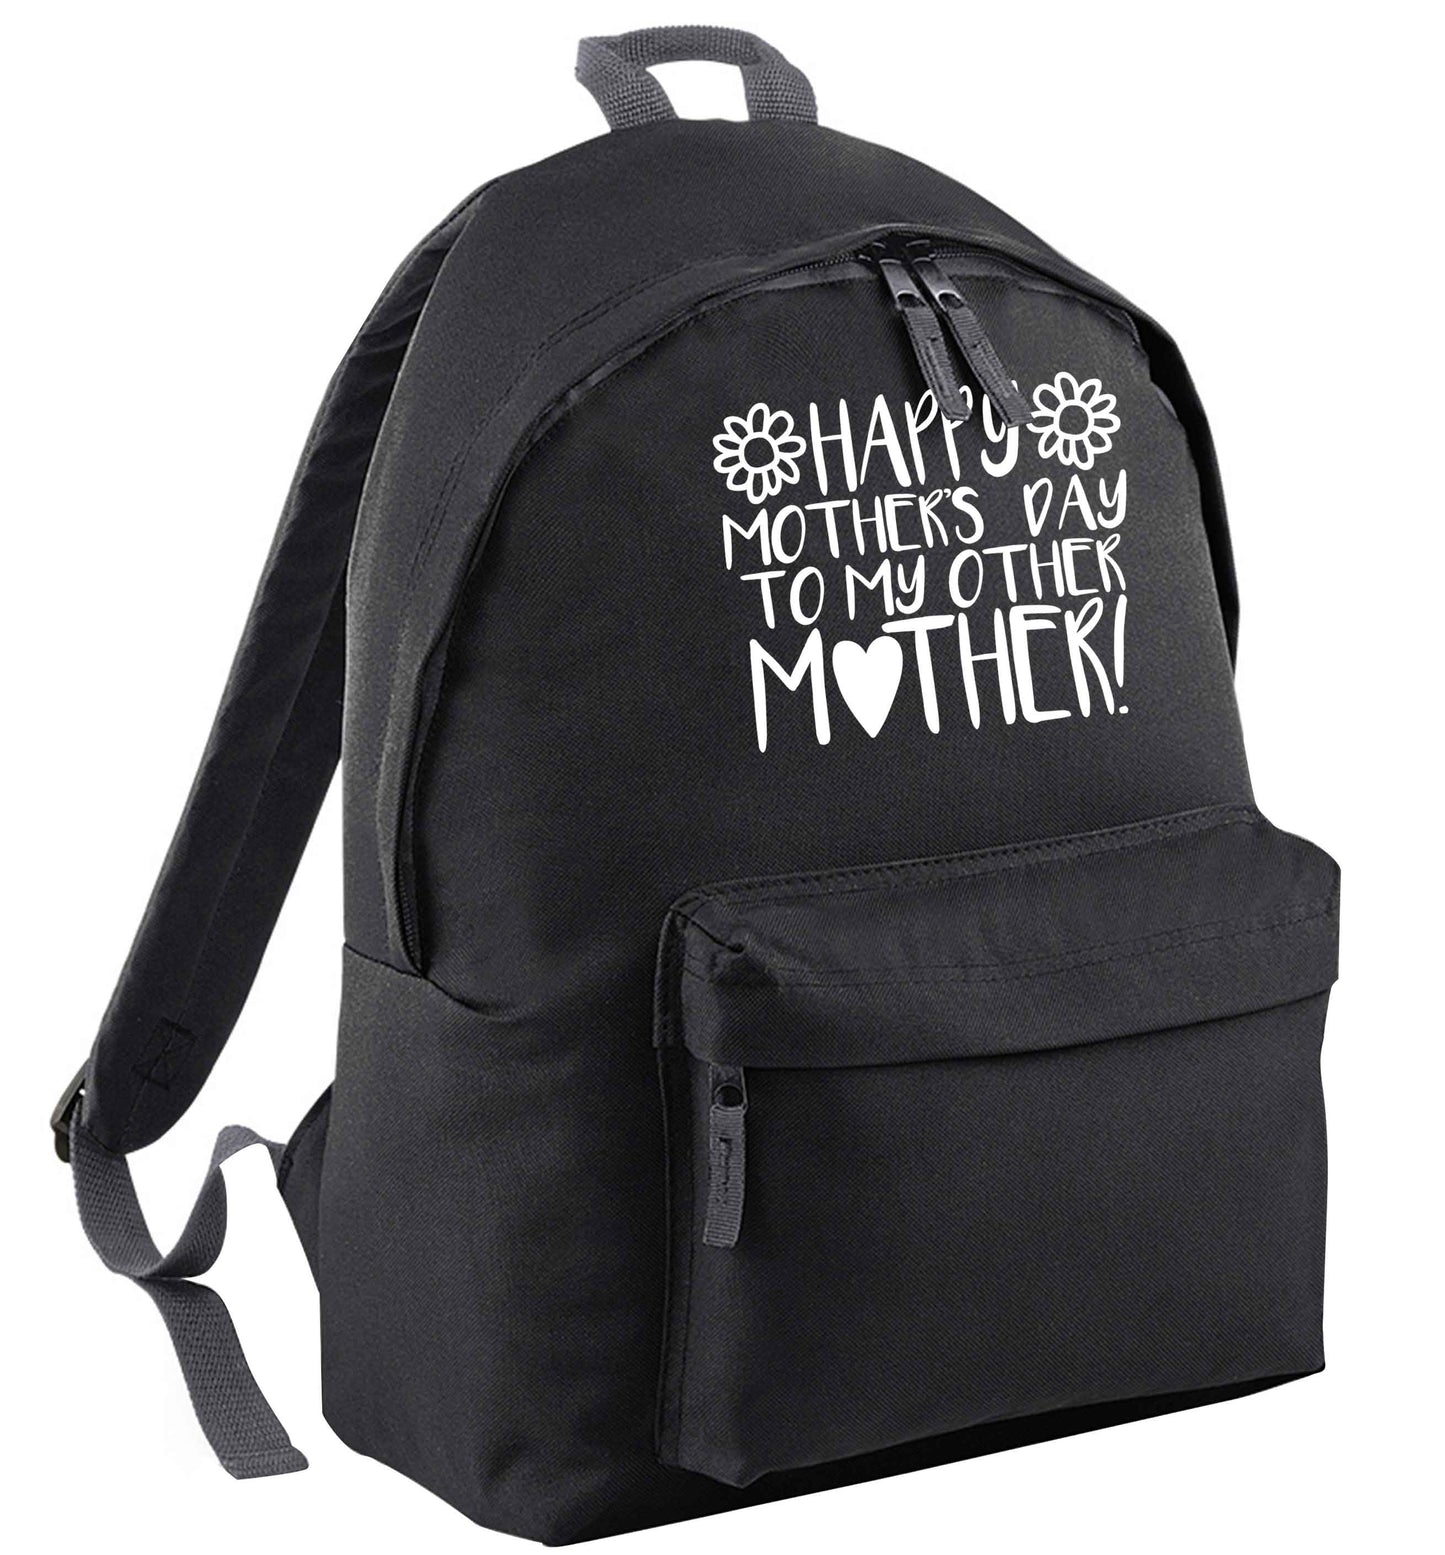 Happy mother's day to my other mother | Children's backpack